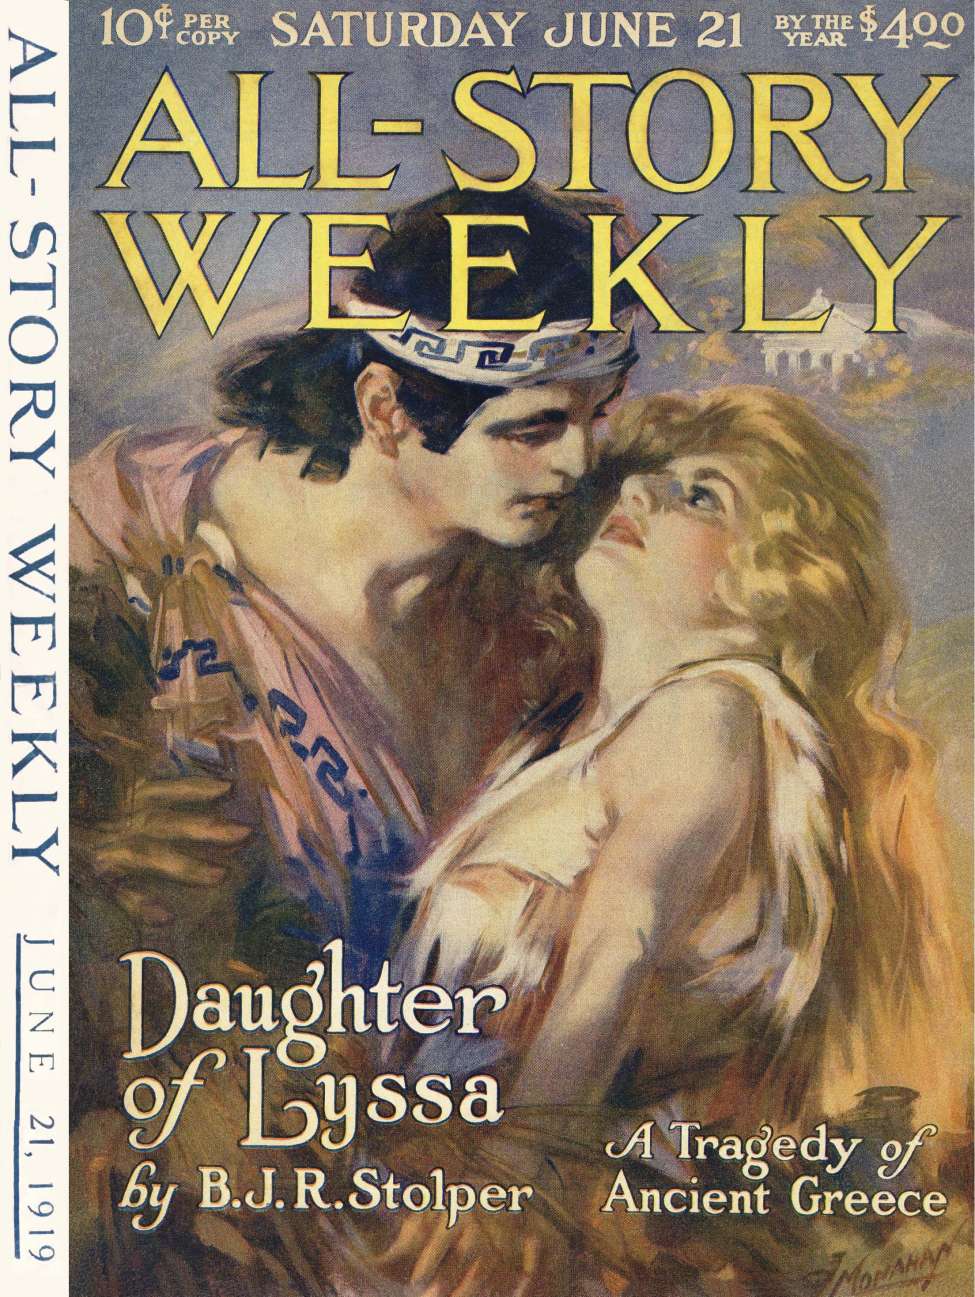 Comic Book Cover For All-Story Weekly v98 3